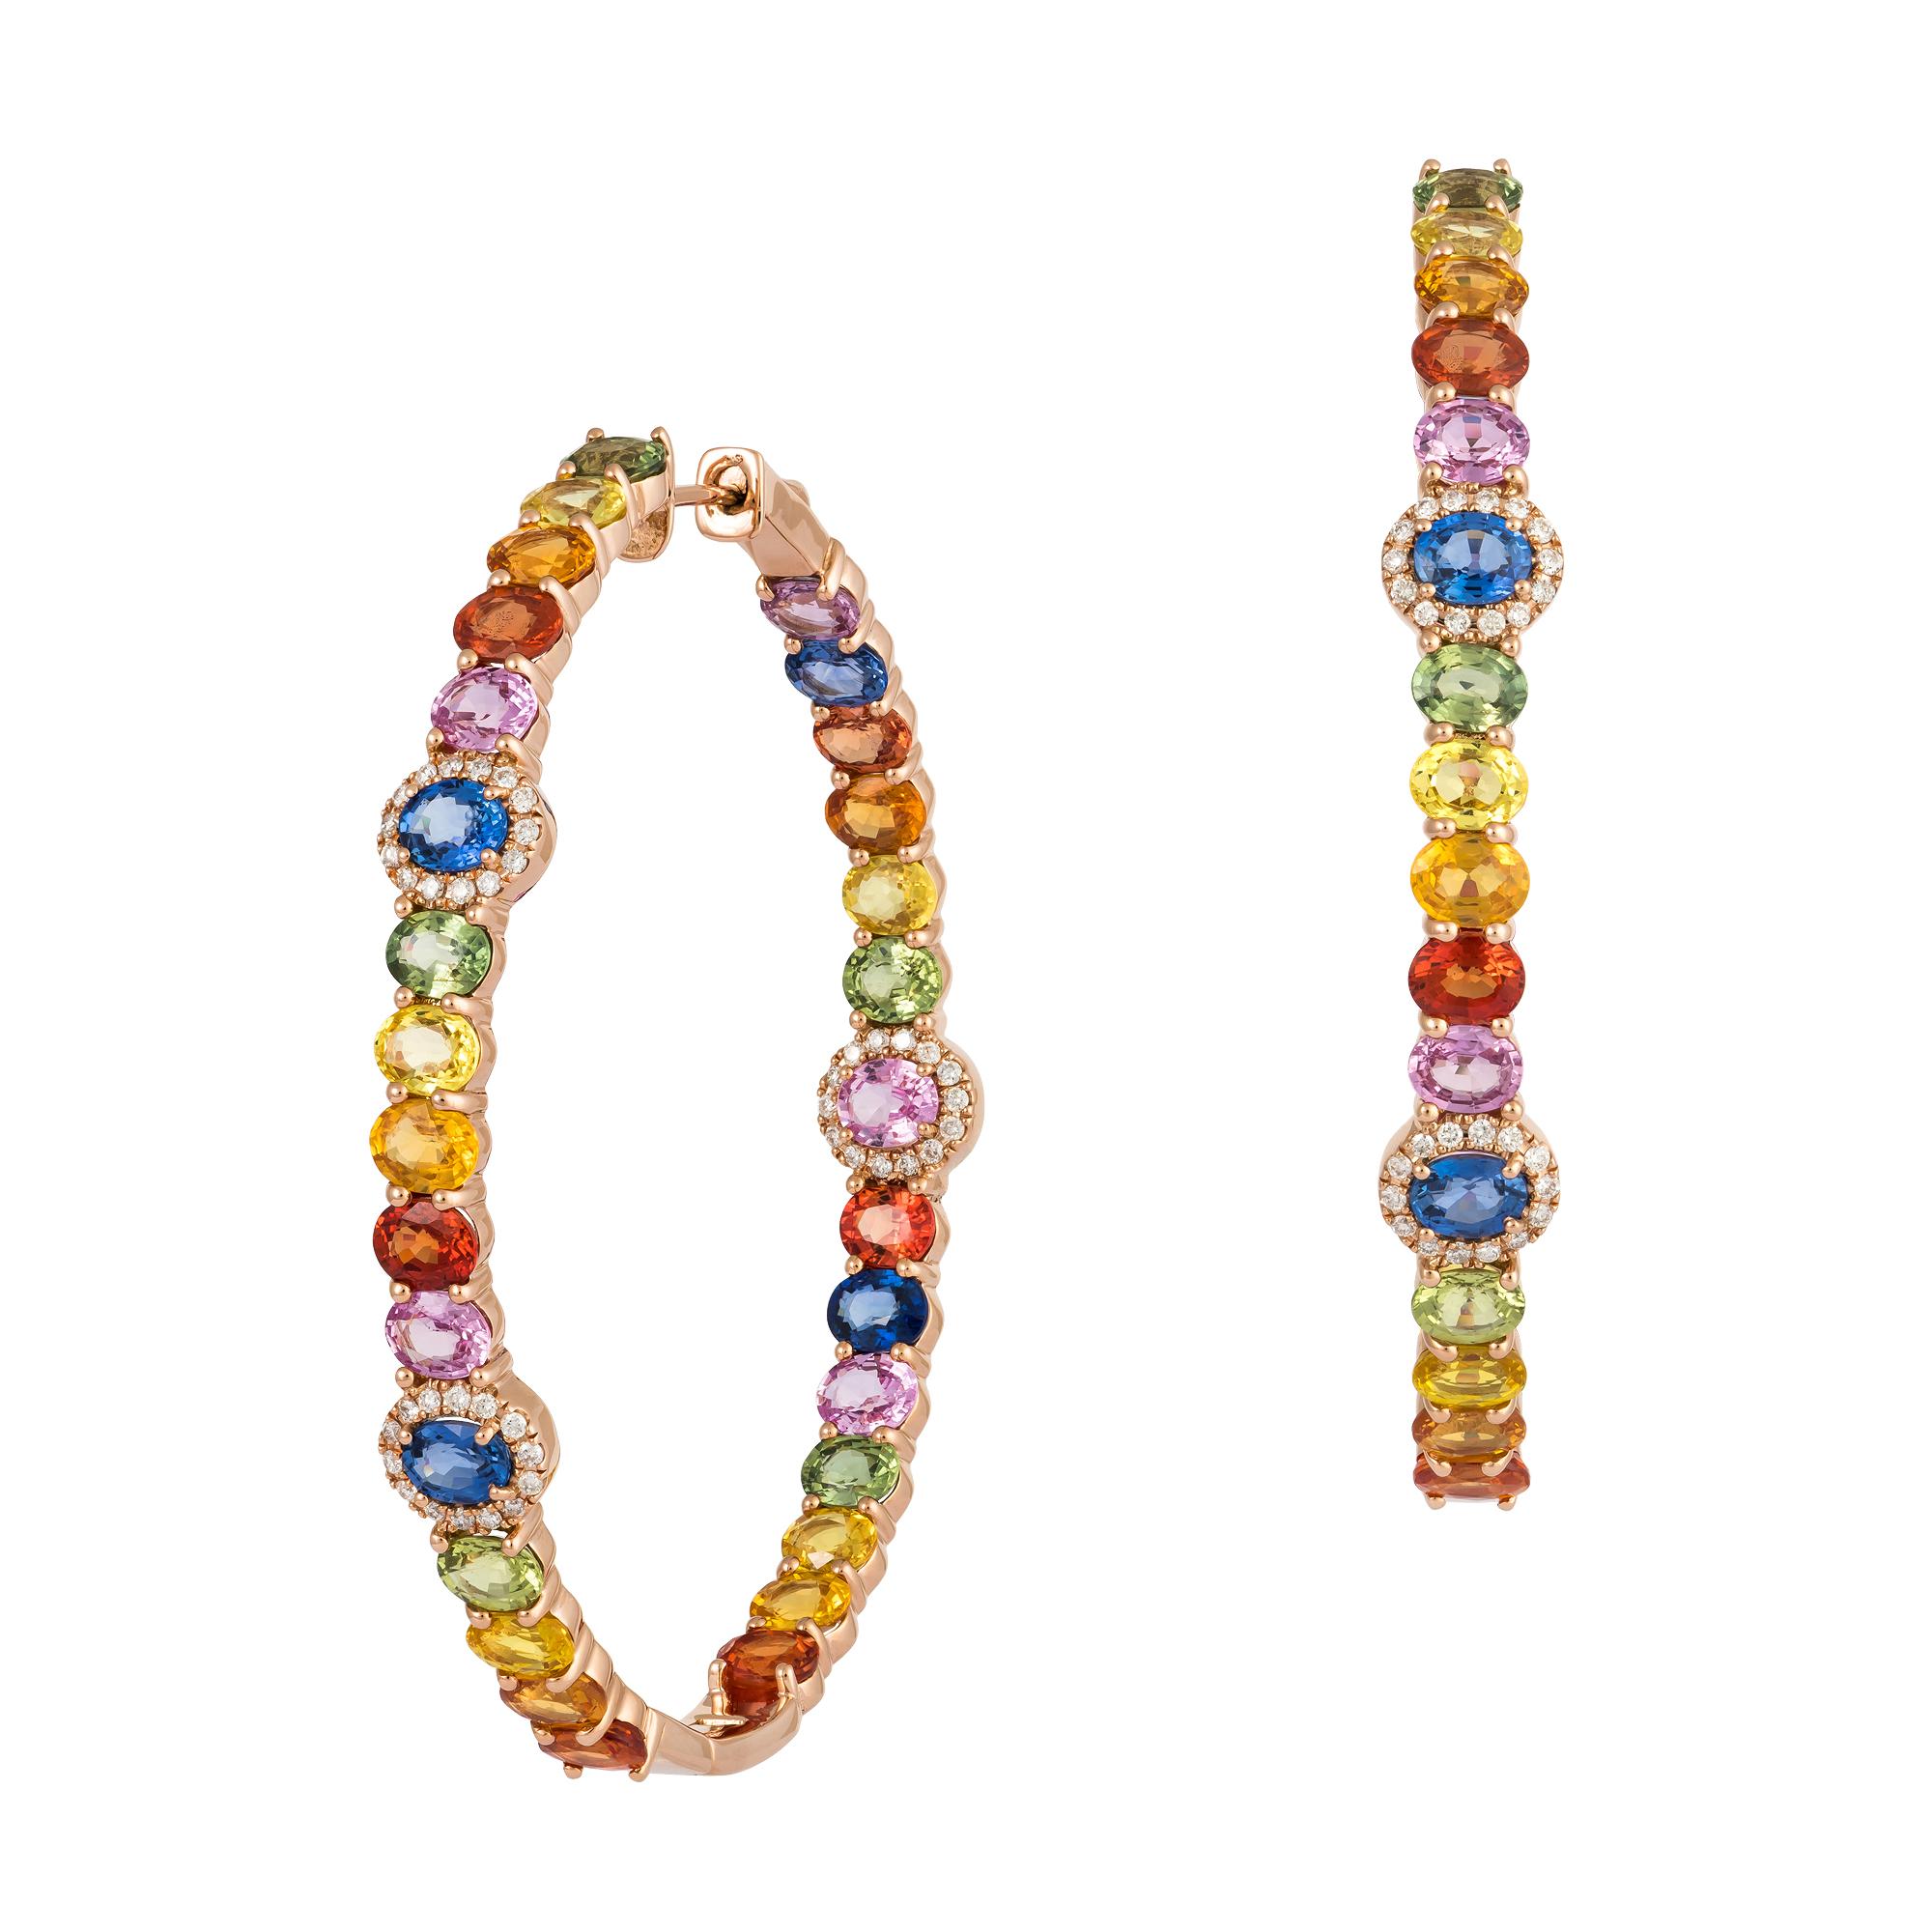 The Following Items we are offering is this Rare Important Radiant 18KT Gold Gorgeous Glittering and Sparkling Magnificent Fancy Rainbow Multi Color Sapphire Hoop Earrings. Earrings contain approx 12.50CTS of Beautiful Fancy Color Sapphires and